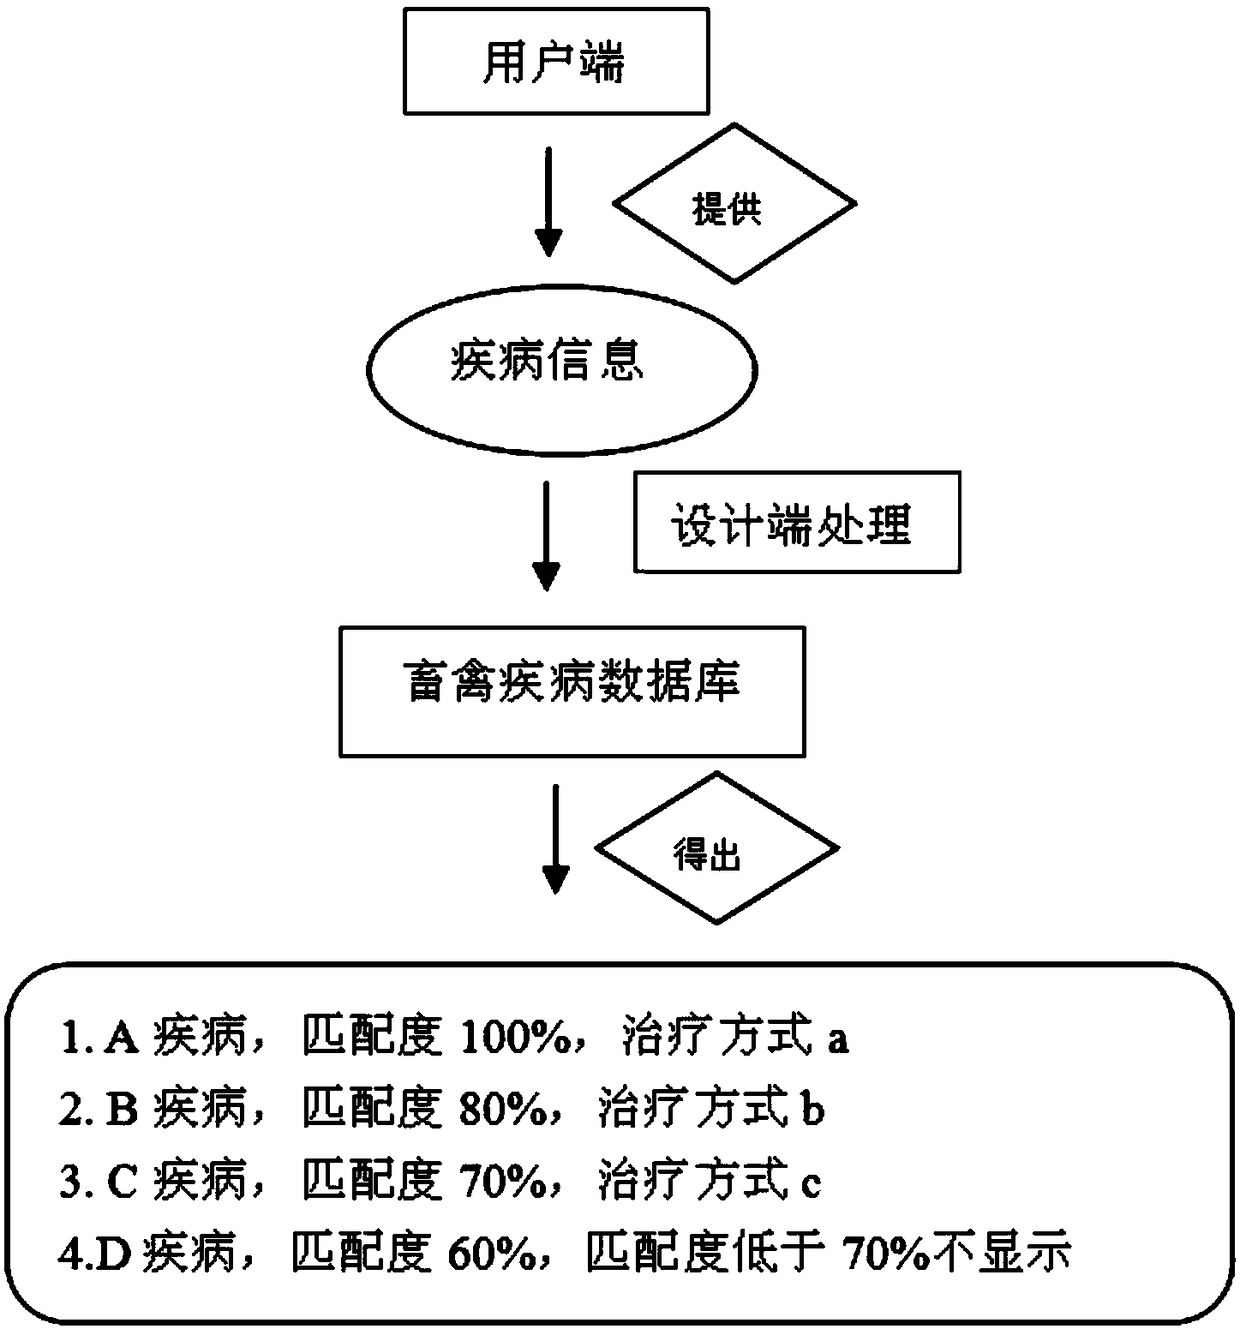 Software design livestock and poultry disease rapid diagnosis and treatment system